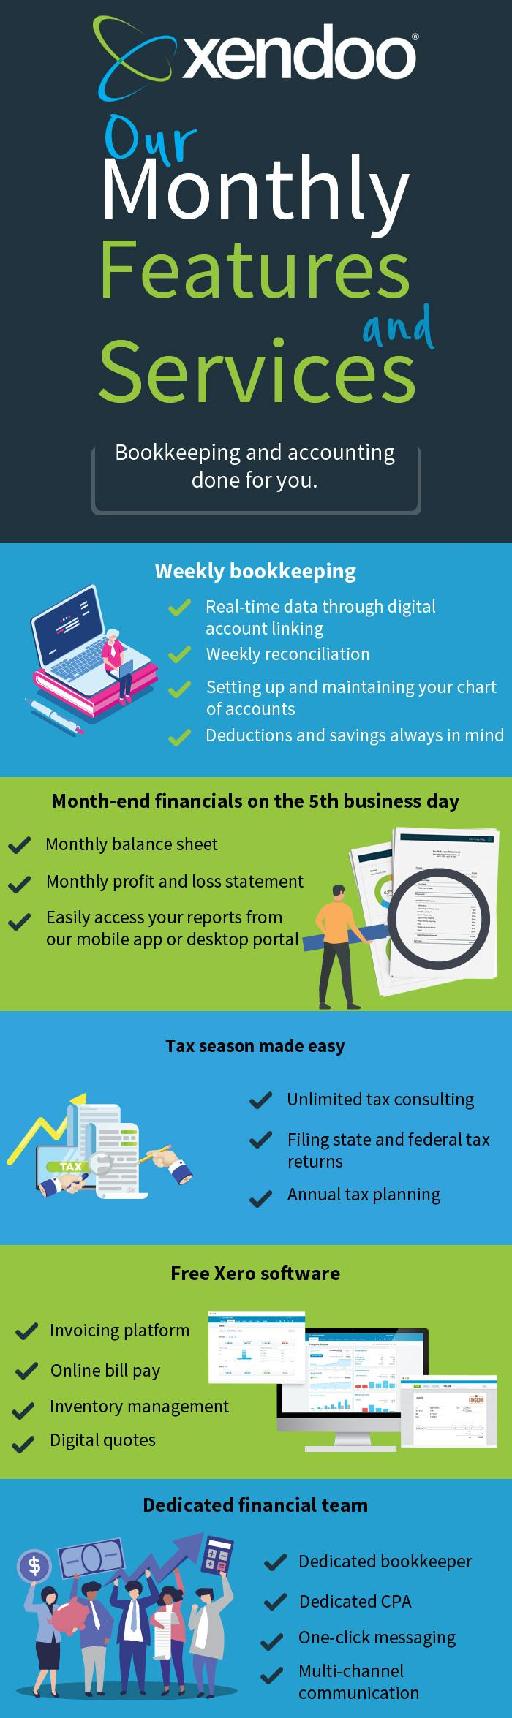 Choose Xendoo for Affordable Monthly Bookkeeping Services